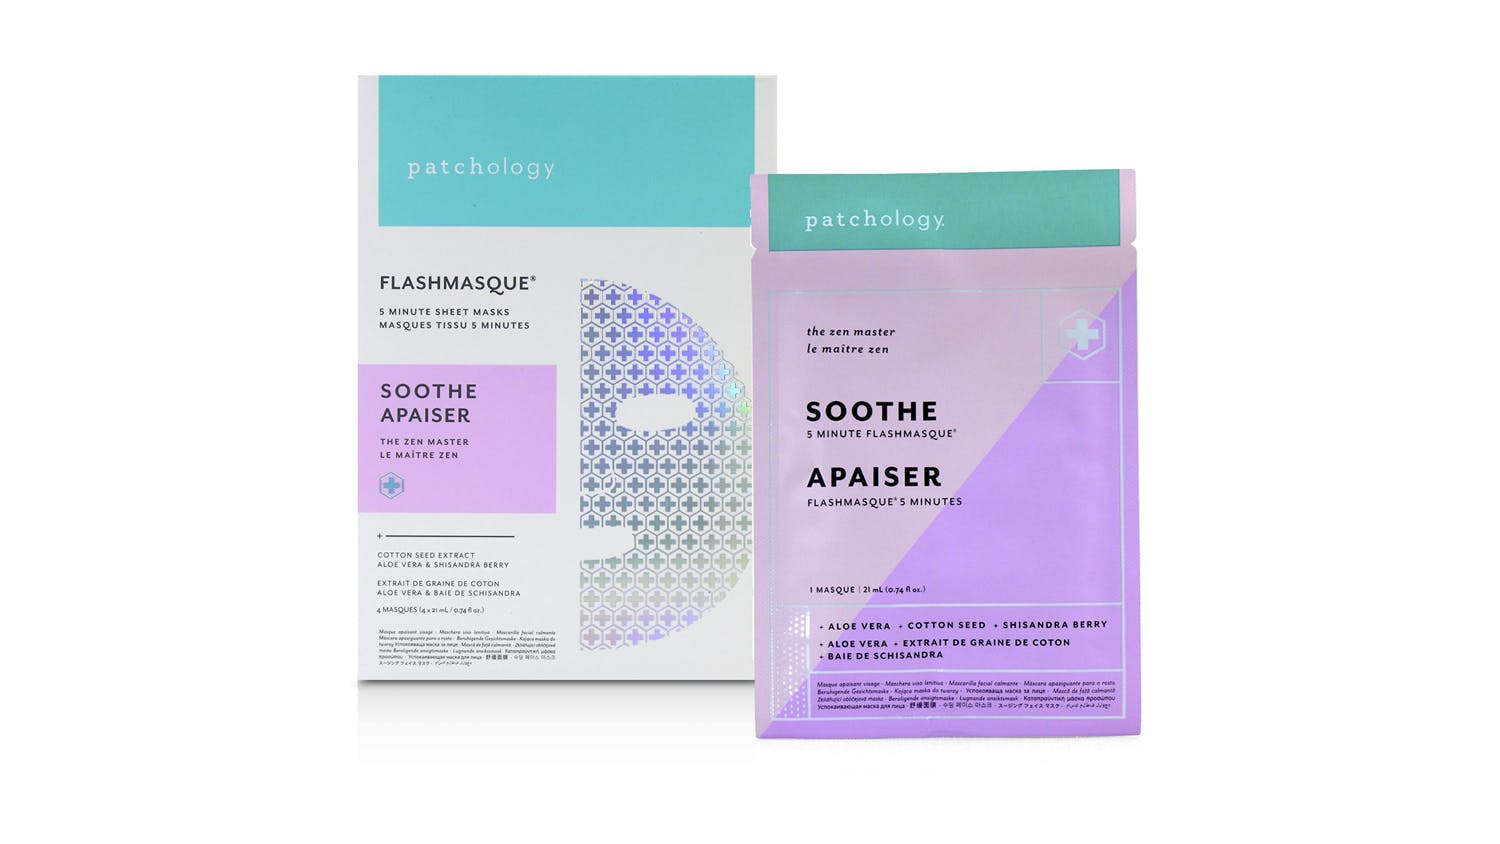 Patchology FlashMasque 5 Minute Sheet Mask - Soothe - 4x21ml/0.74oz